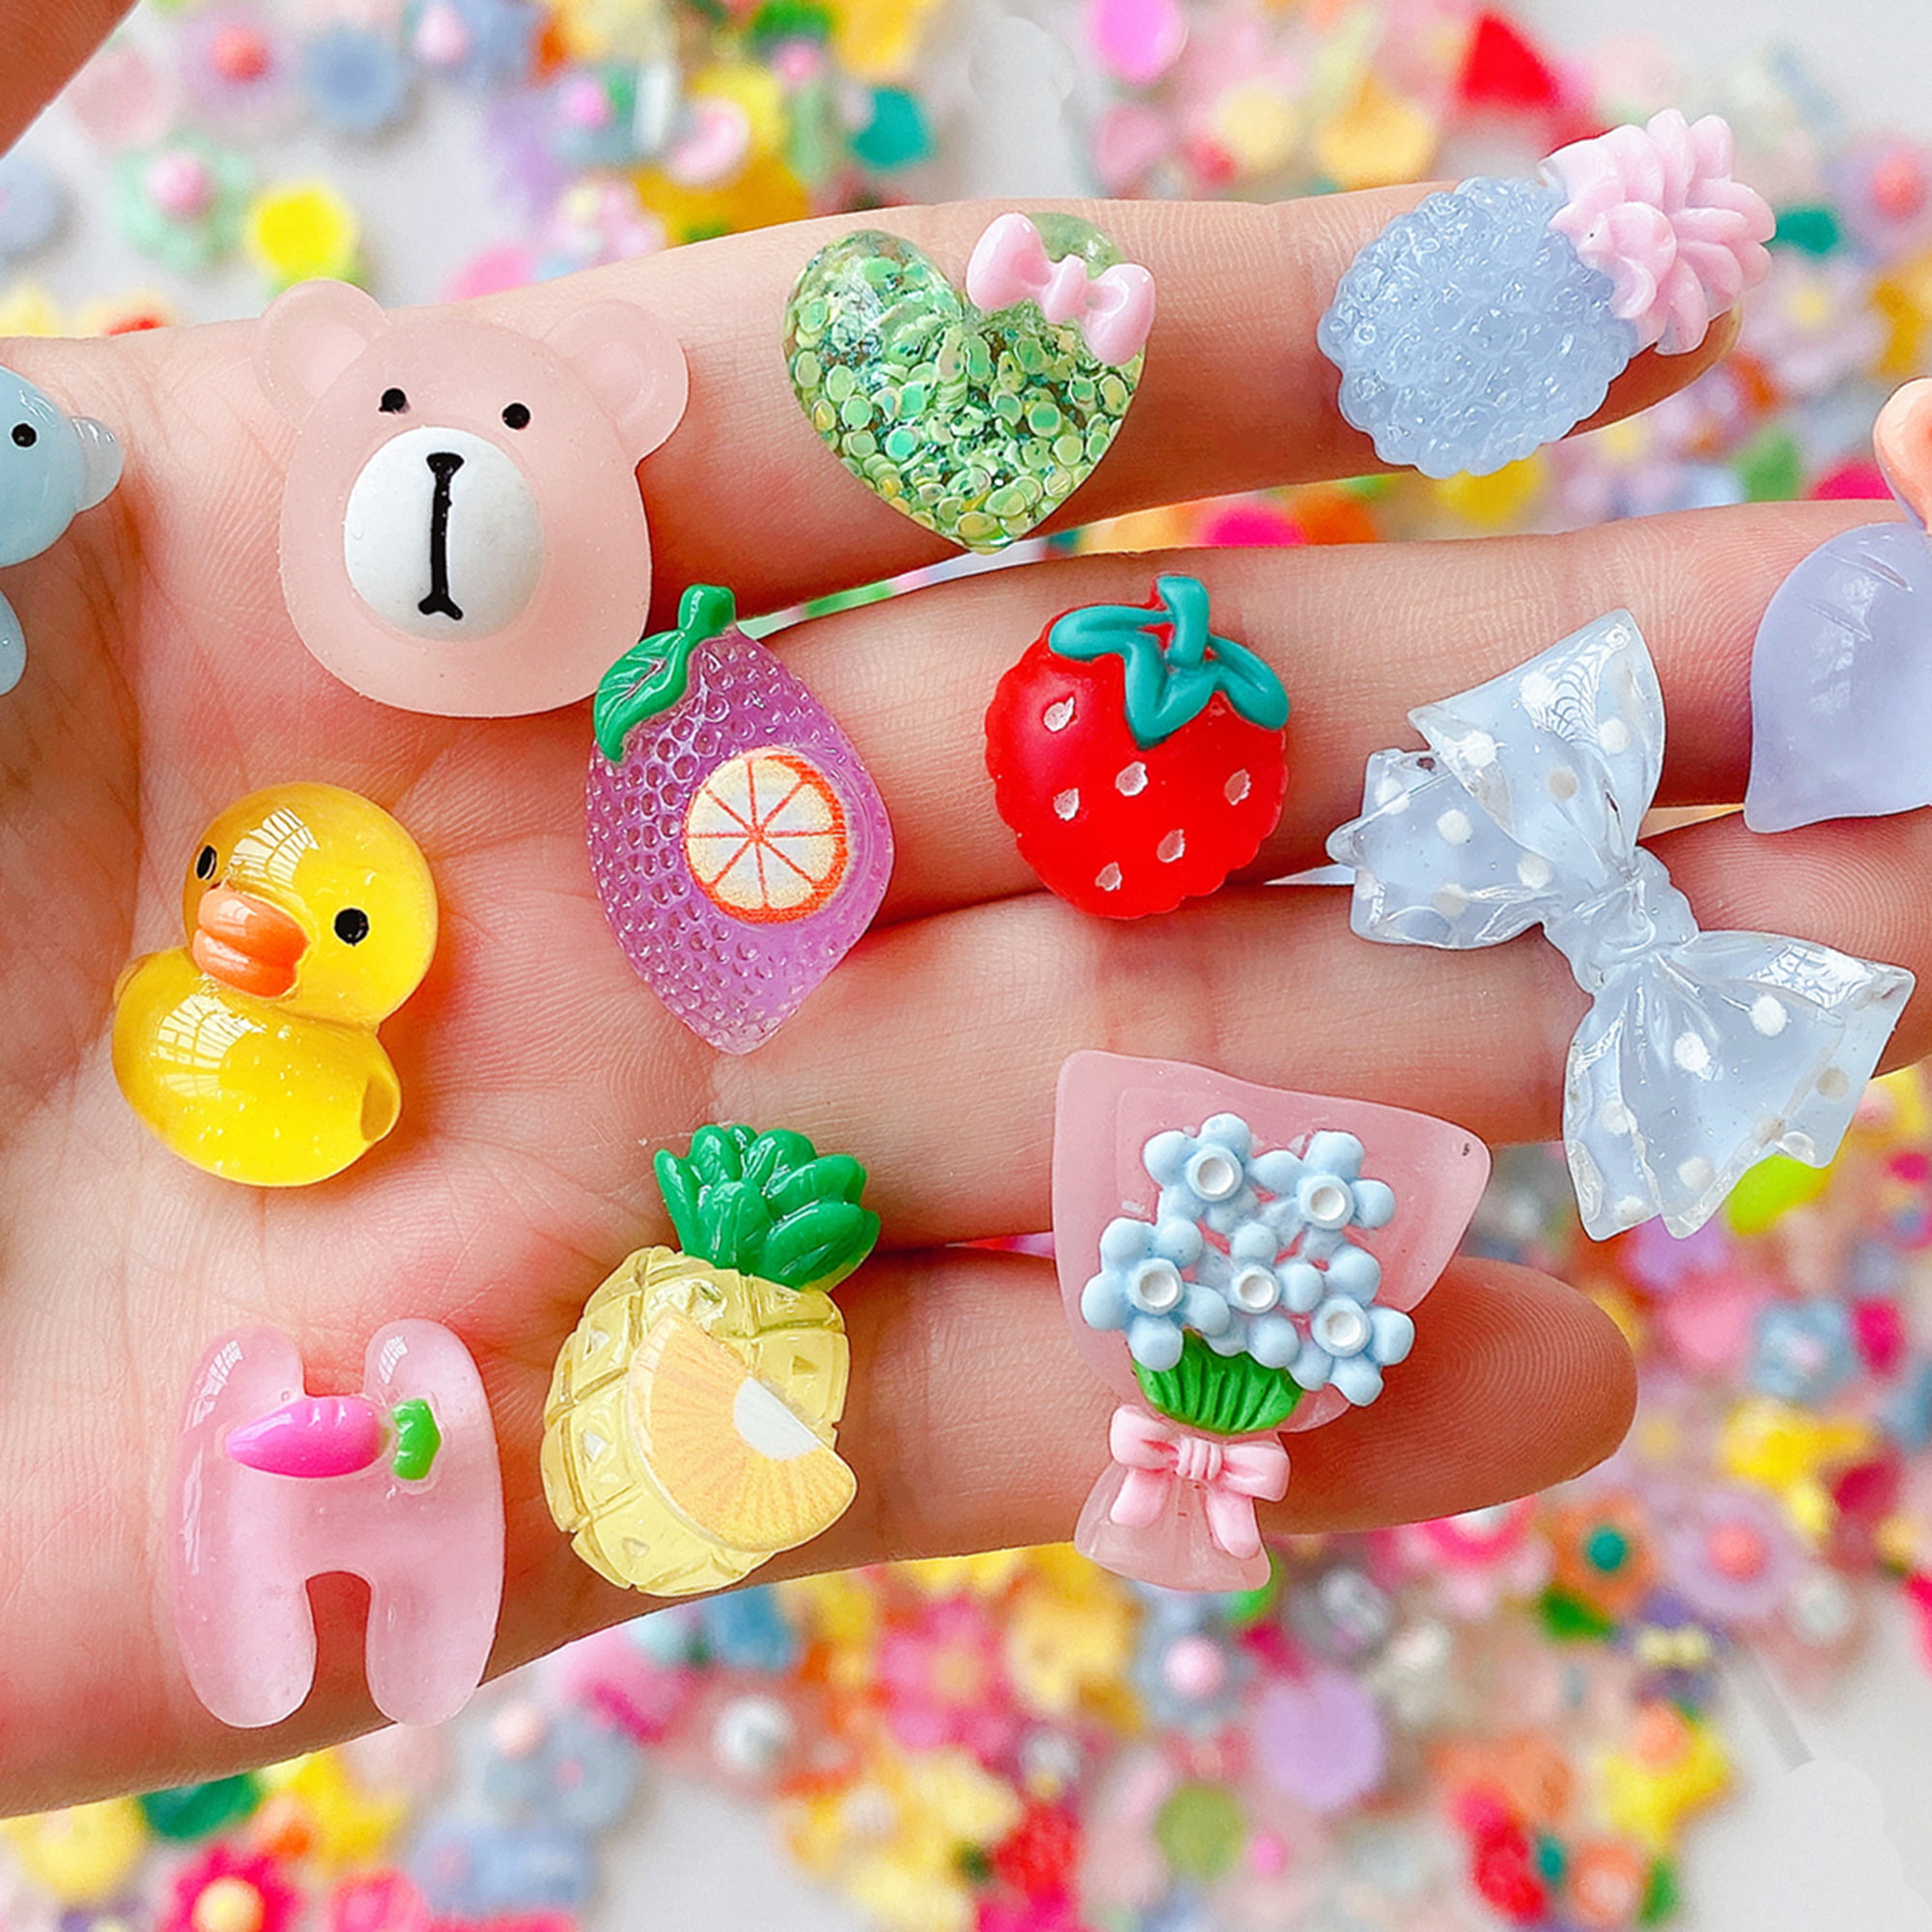 200 Pcs Slime Charms Cute Set , Bulk Mixed Resin Flatback Fake Candy Charms  Assorted Sweets Slime Beads Making Supplies for DIY Craft Making and